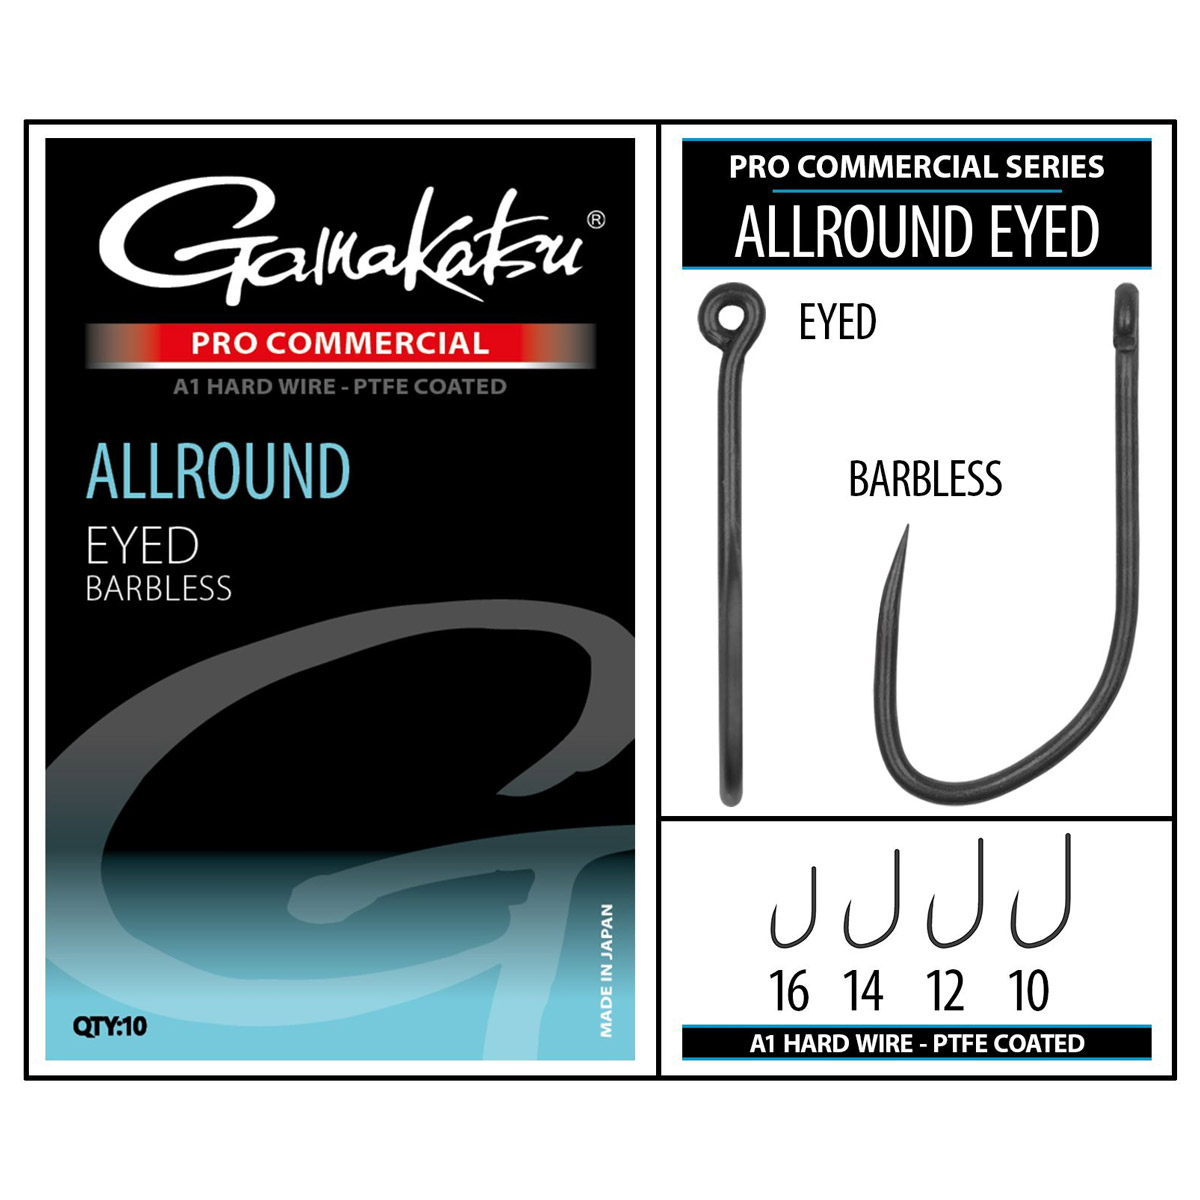 Gamakatsu Pro Commercial Allround A1 Eyed Barbless